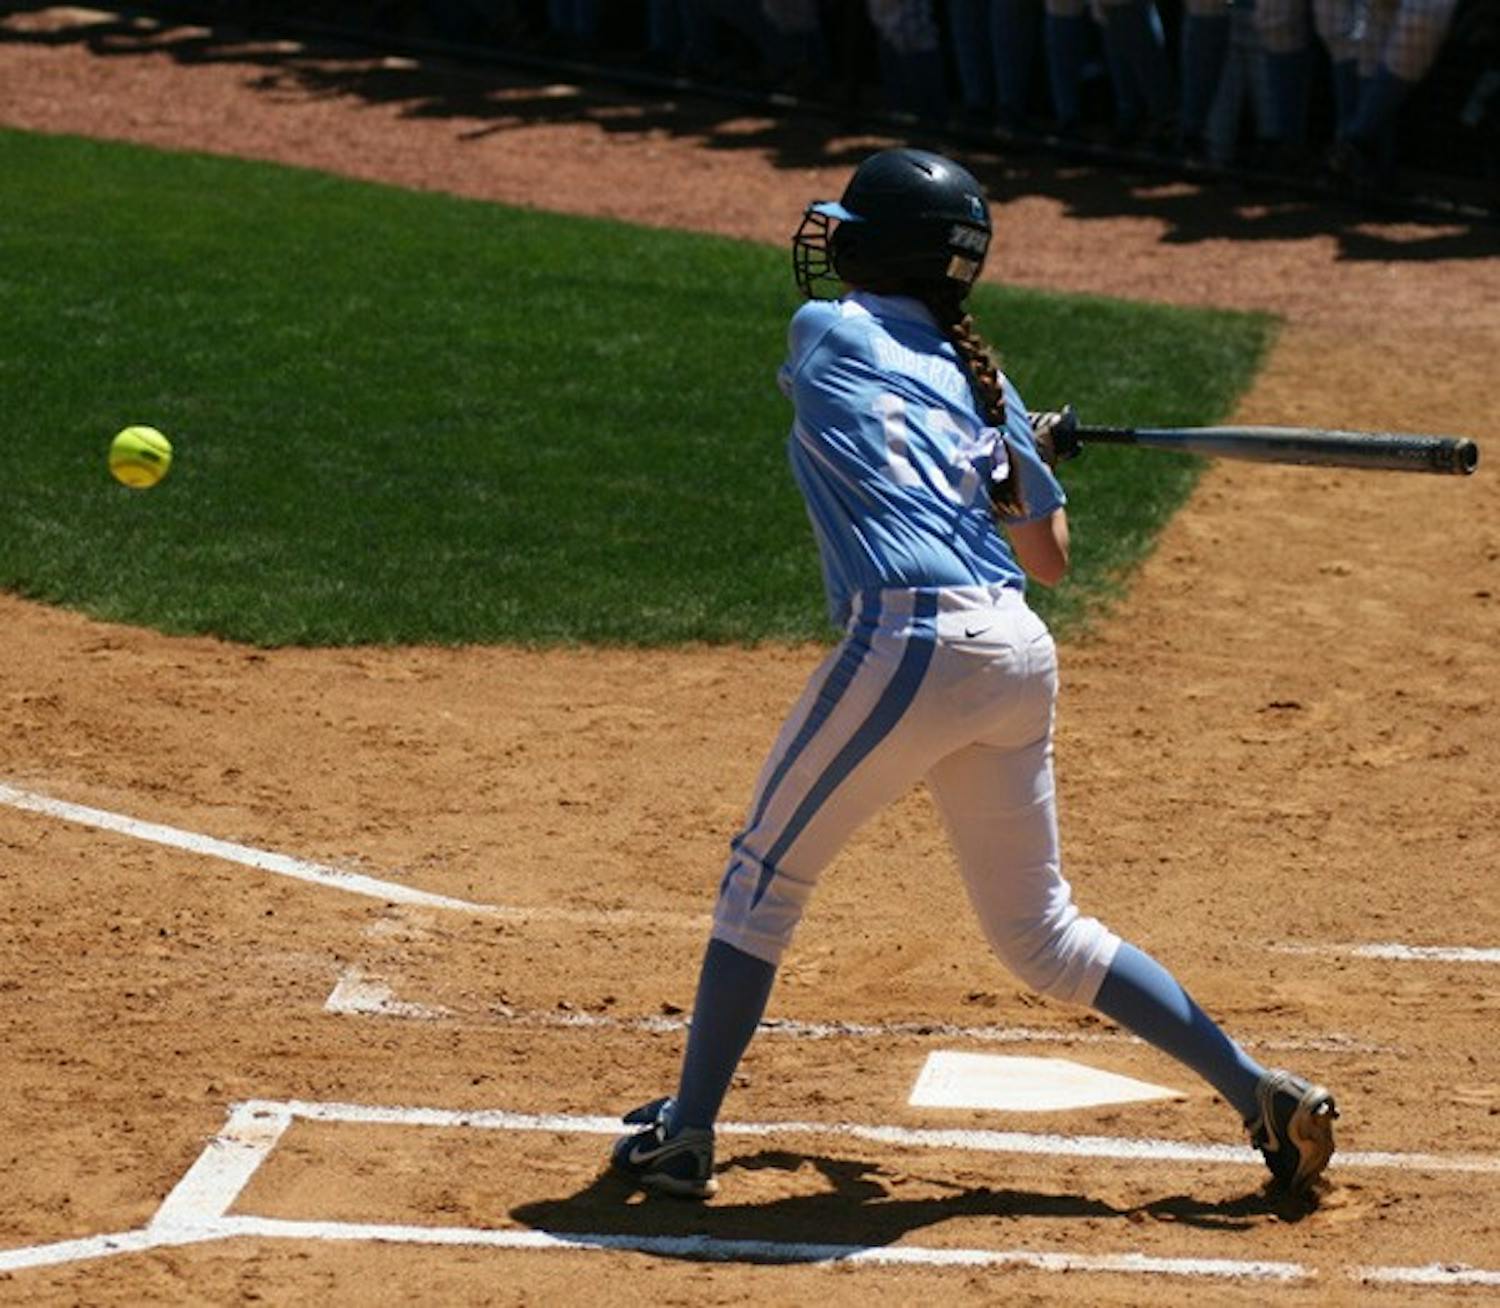 Anna Roberts was one bright spot for UNC in the Tar Heels’ series against Maryland. DTH/Ducan Culbreath